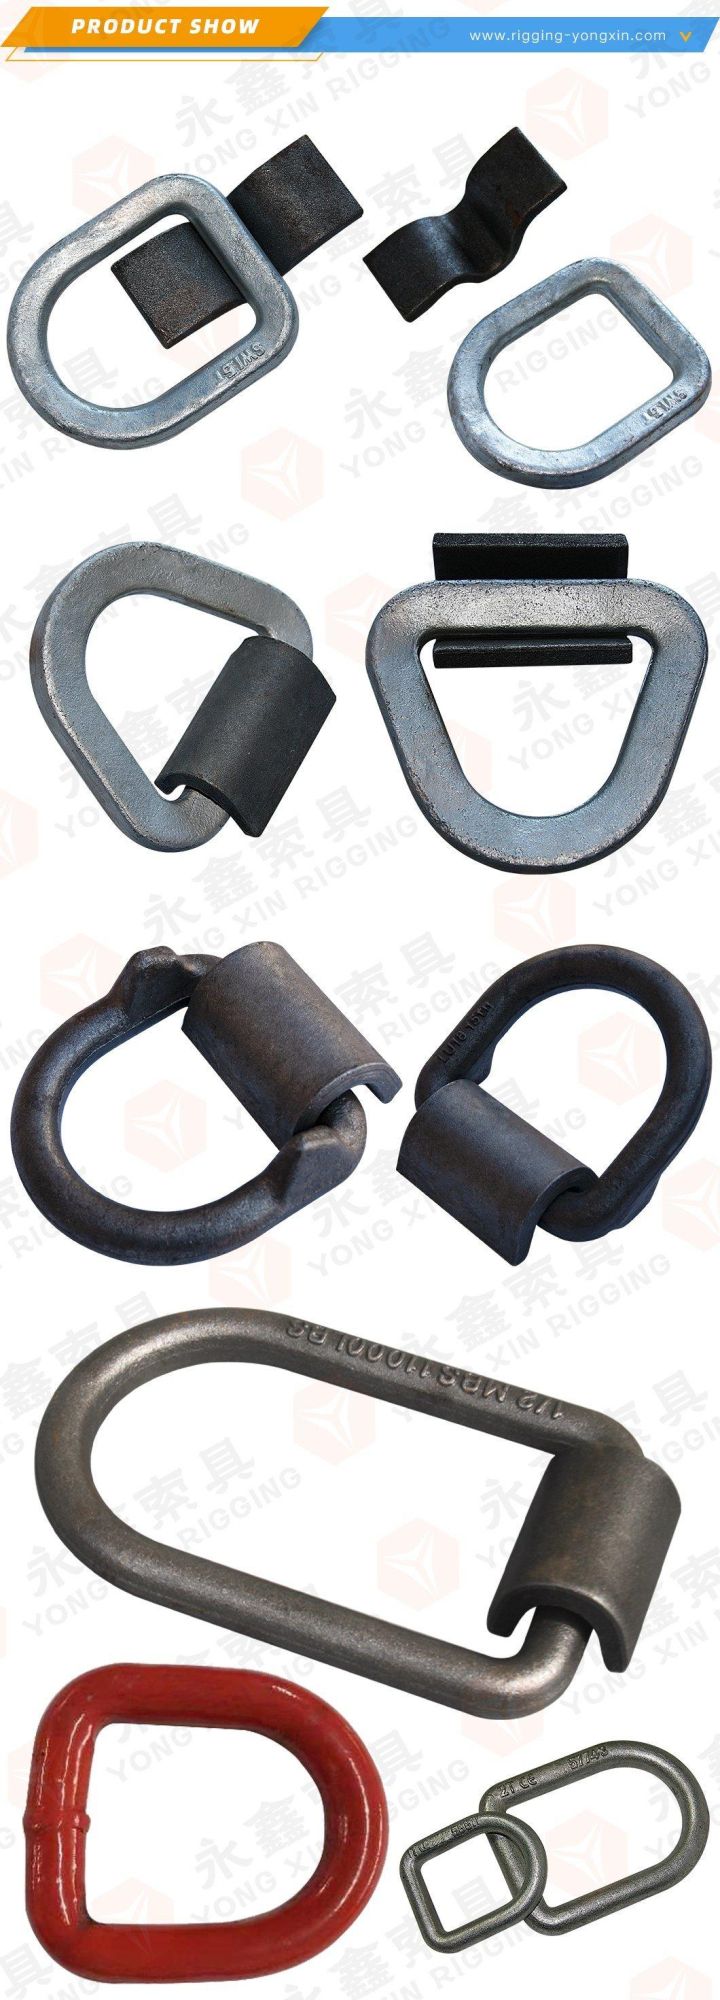 D Link D Ring with Supporting Point|Customized Forged Lashing D Ring|Hot Sale D Ring